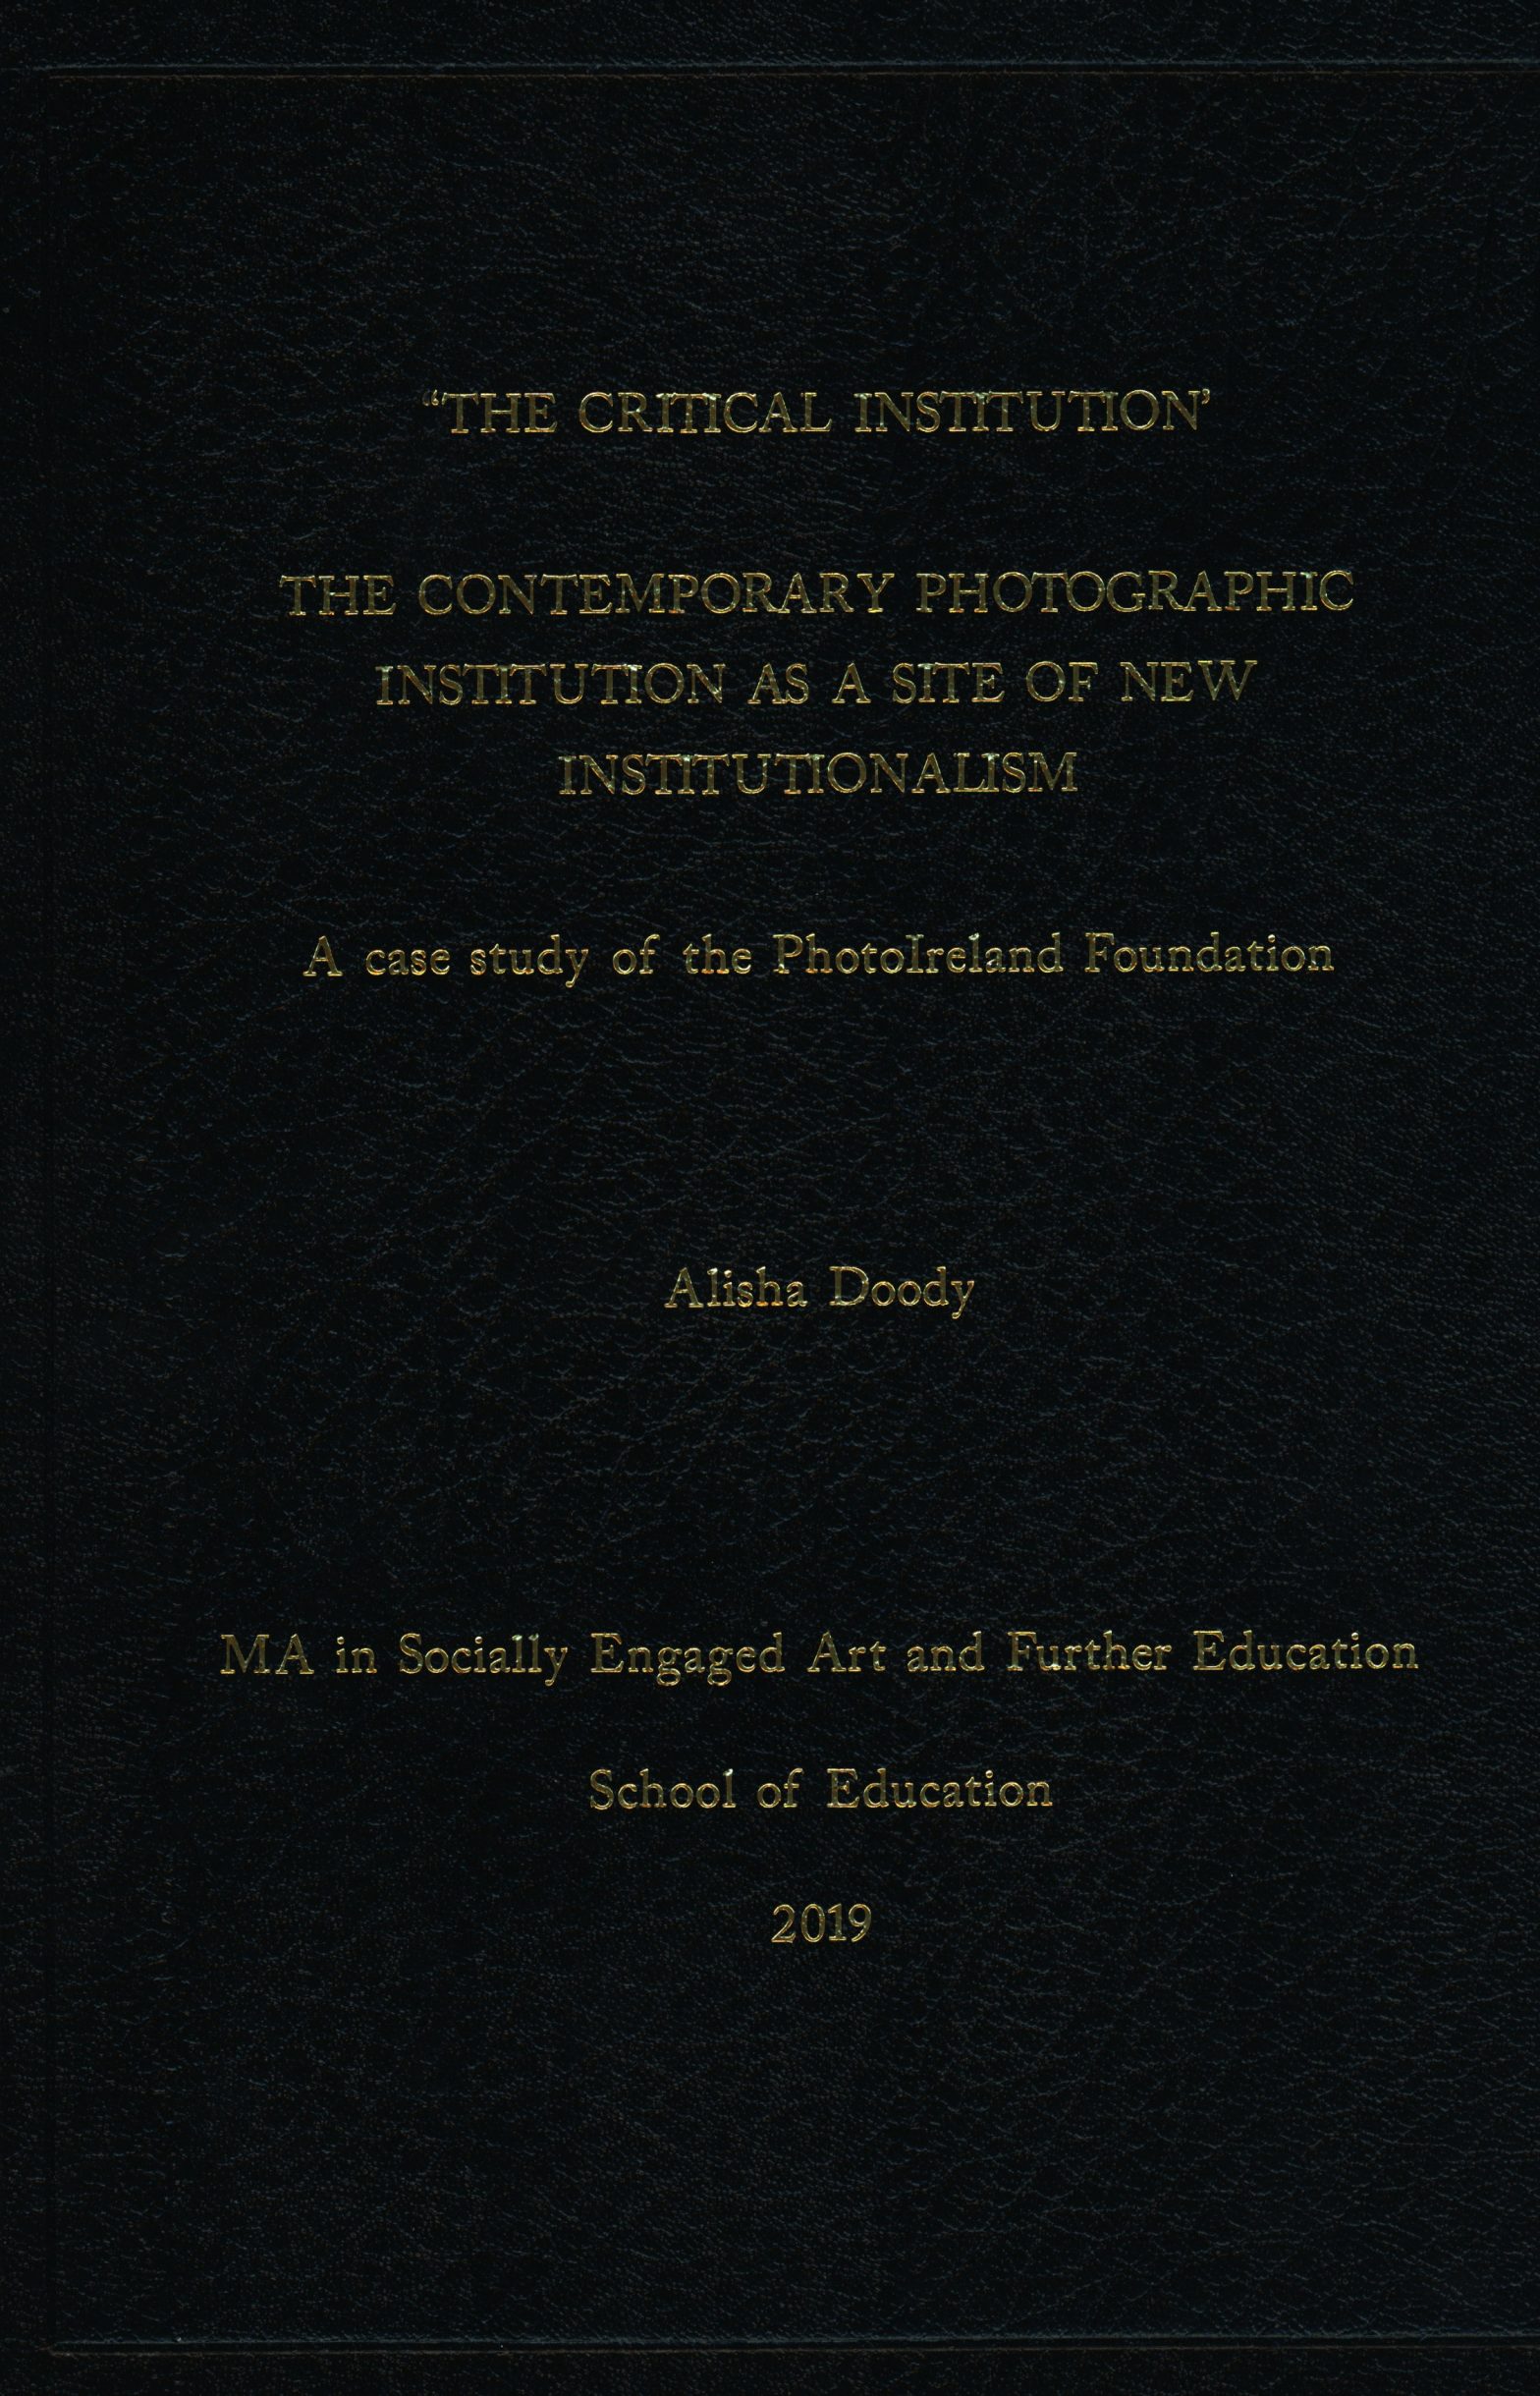 ‘The Critical Institution’ The Contemporary Photographic Institution as a Site of New Institutionalism: A Case Study of the PhotoIreland Foundation Alisha Doody